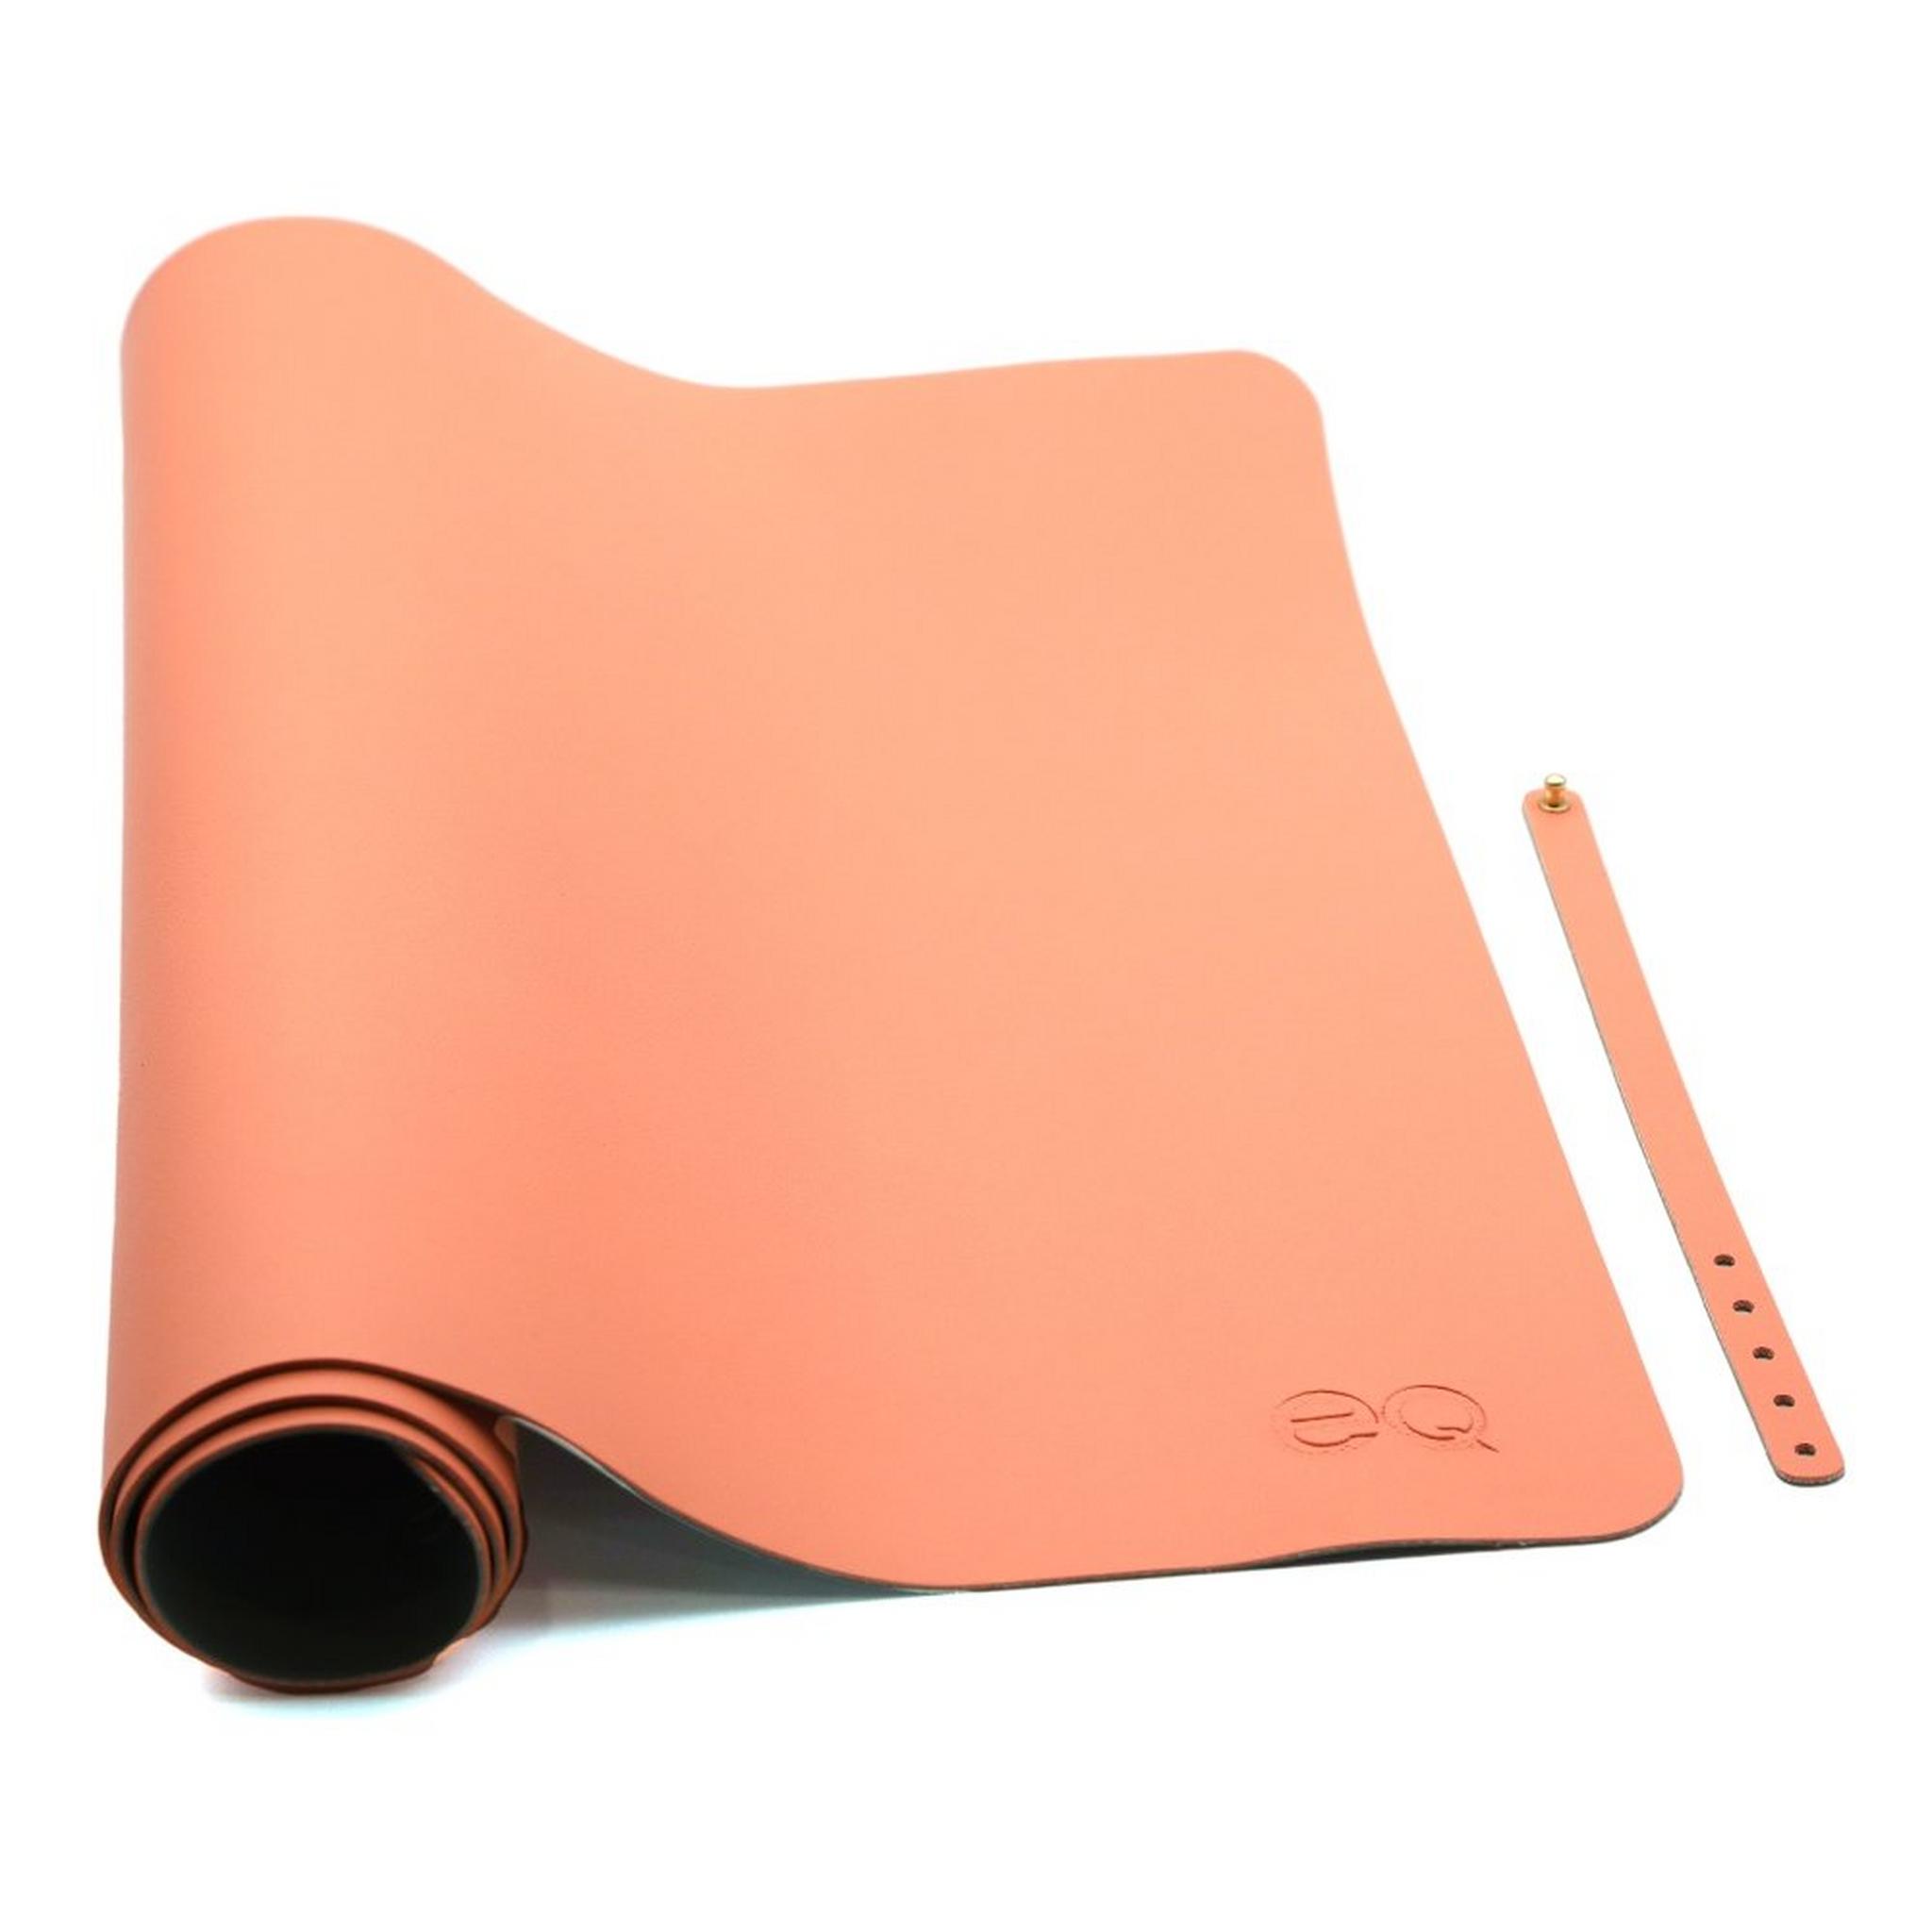 EQ Water-Proof Mouse Pad - Green / Orange